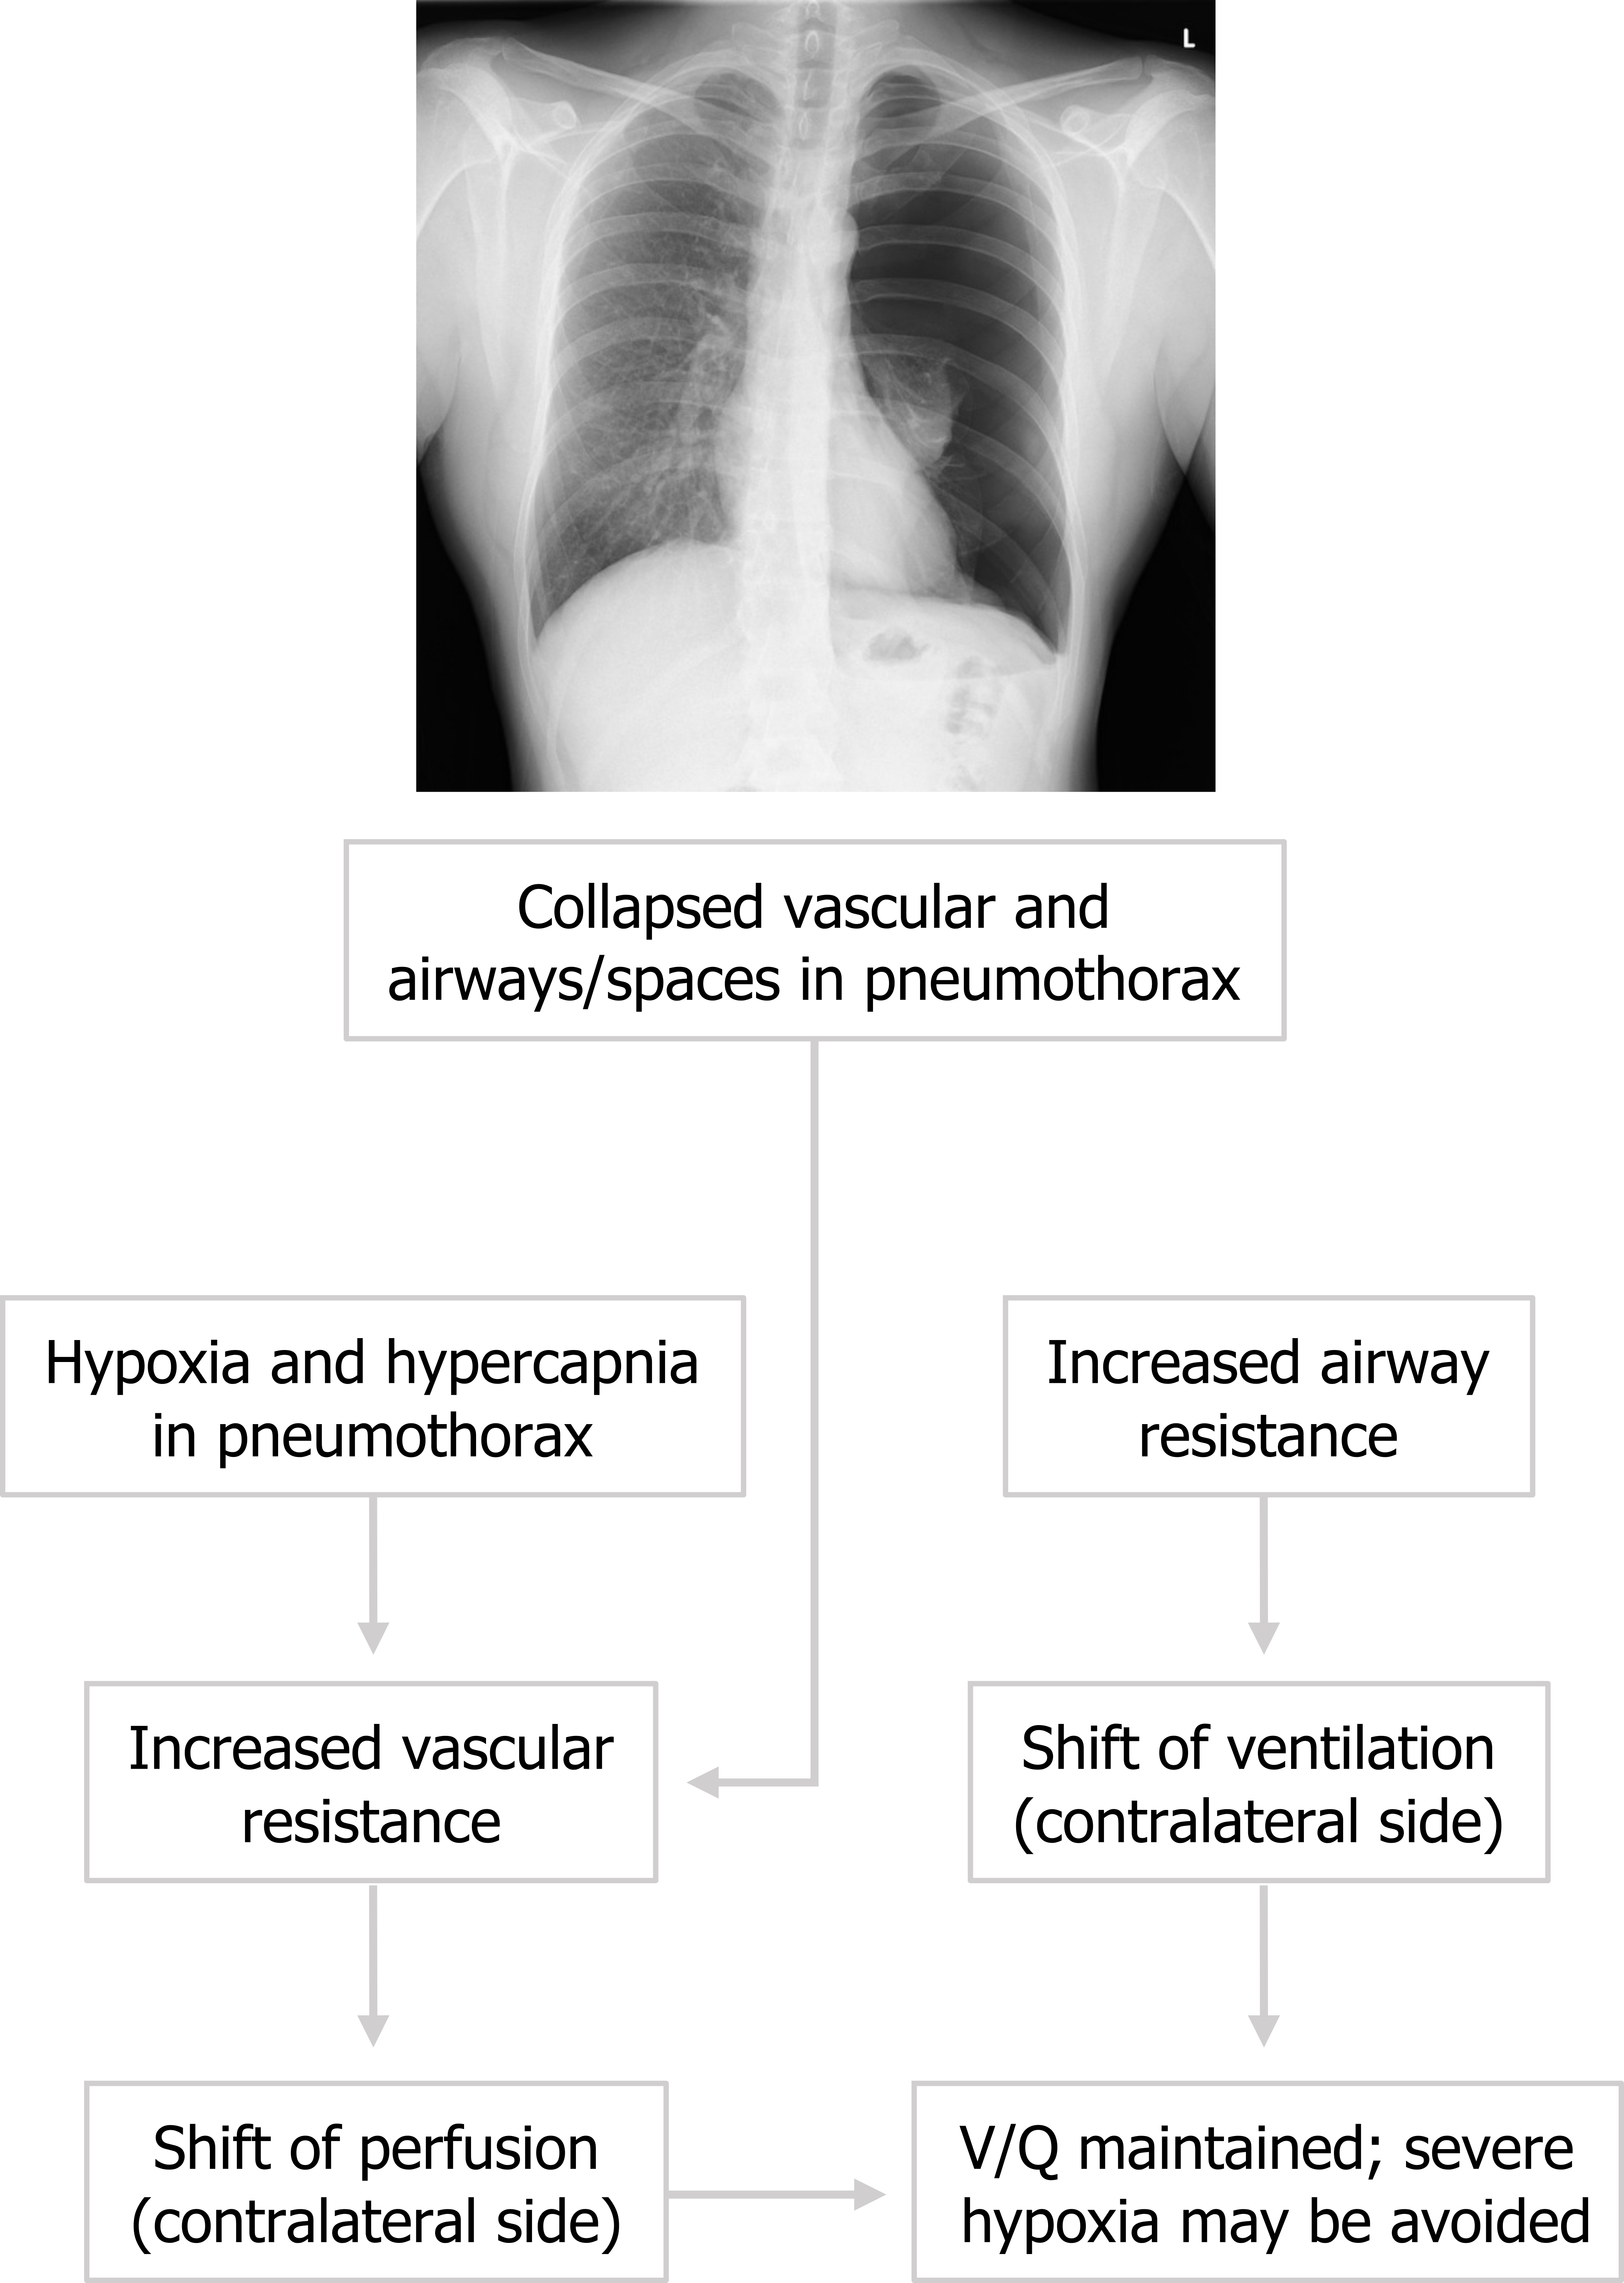 Collapsed vascular and airways/spaces in pneumothorax arrow to hypoxia and hypercapnia in pneumothorax arrow to increased vascular resistance arrow to shift of perfusion contralateral side arrow to V/Q maintained, severe hypoxia may be avoided. Collapsed vascular and airways/spaces in pneumothorax arrow to increased airway resistance arrow to shift of ventilation contralateral side arrow to V/Q maintained, severe hypoxia may be avoided. Collapsed vascular and airways/spaces in pneumothorax arrow to increased vascular resistance